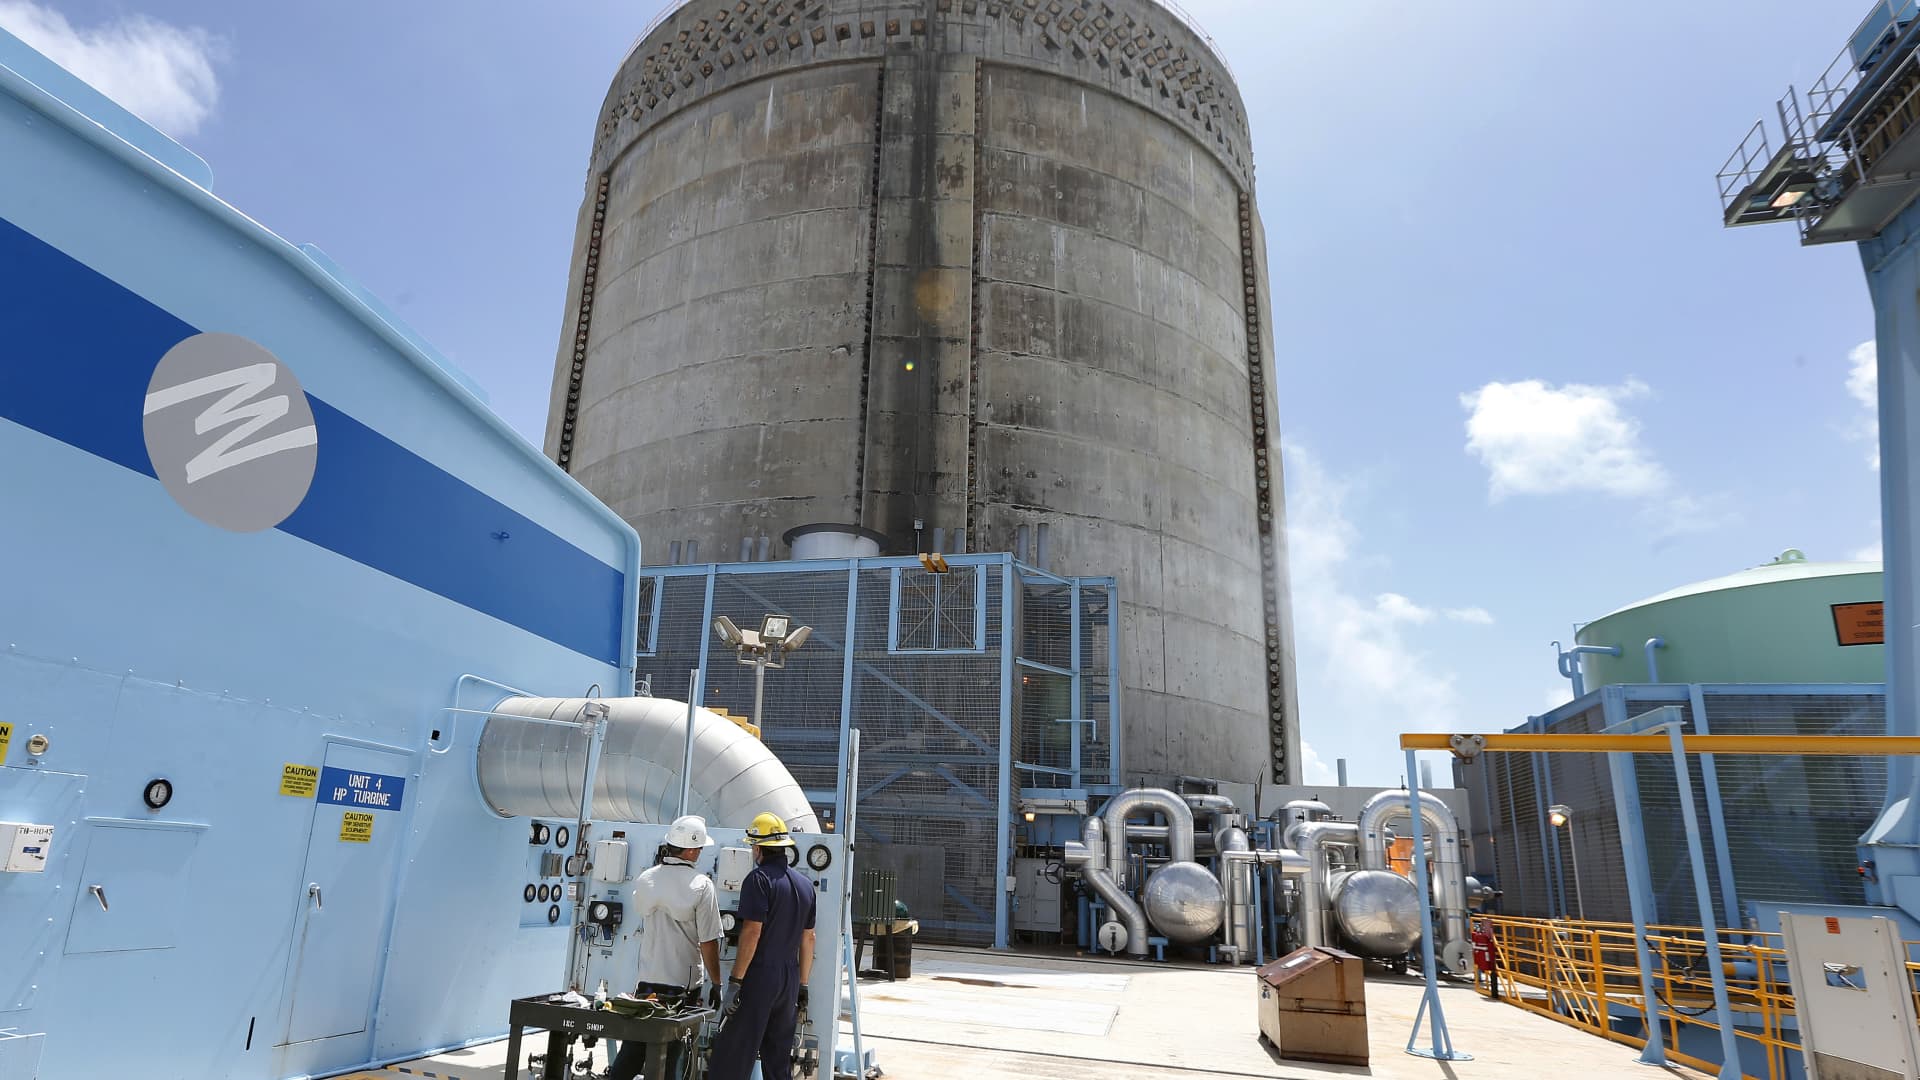 Florida Power and Light workers Juan Madruga (R) and Pehter Rodriguez (L) confer at the Turkey Point Nuclear Reactor Building in Homestead, Florida May 18, 2017.